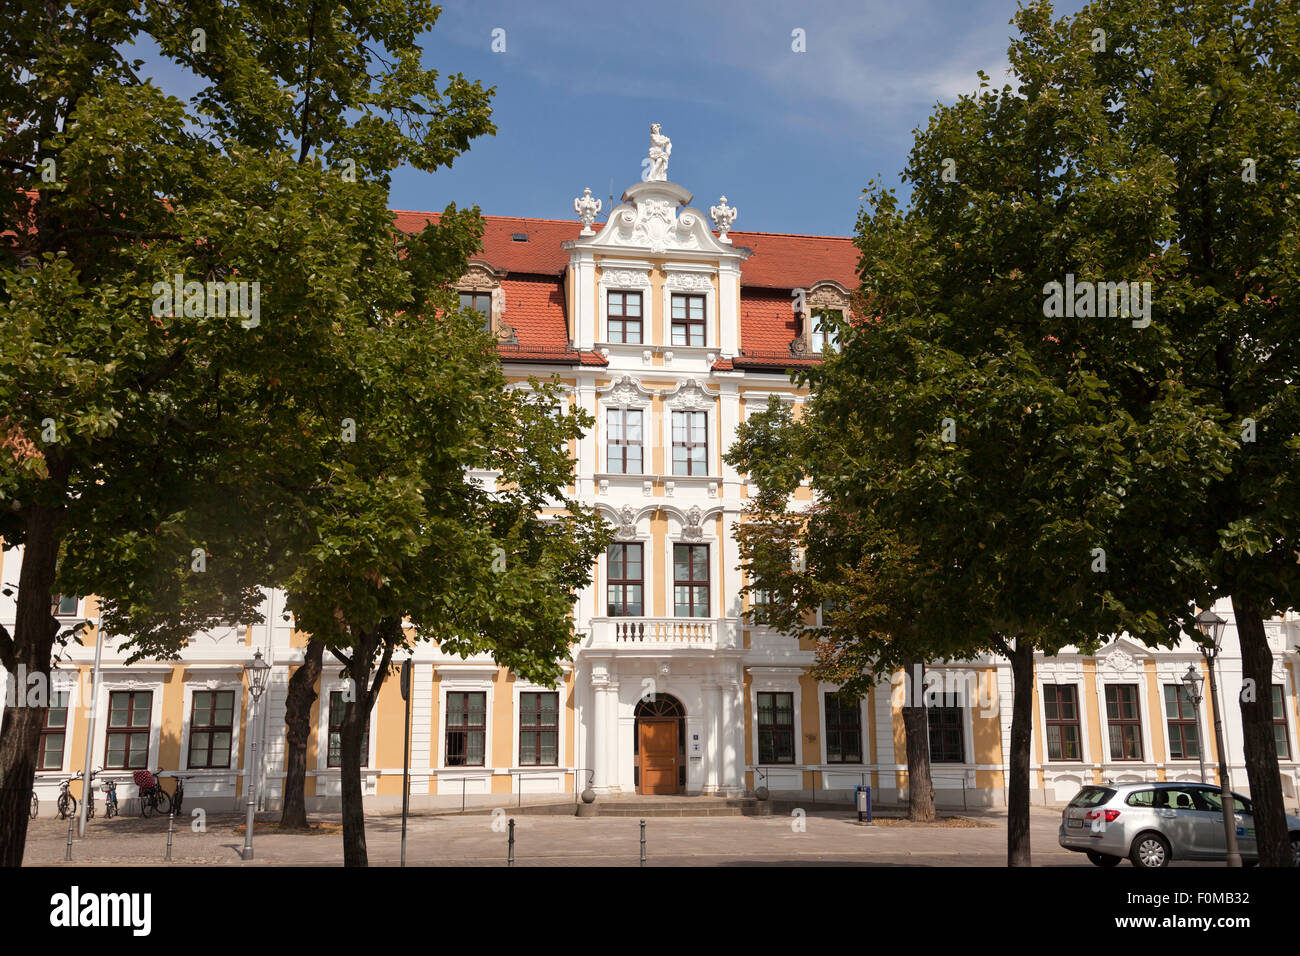 baroque facade of the Landtag, seat of the government of Saxony-Anhalt, Magdeburg, Saxony- Anhalt, Germany Stock Photo